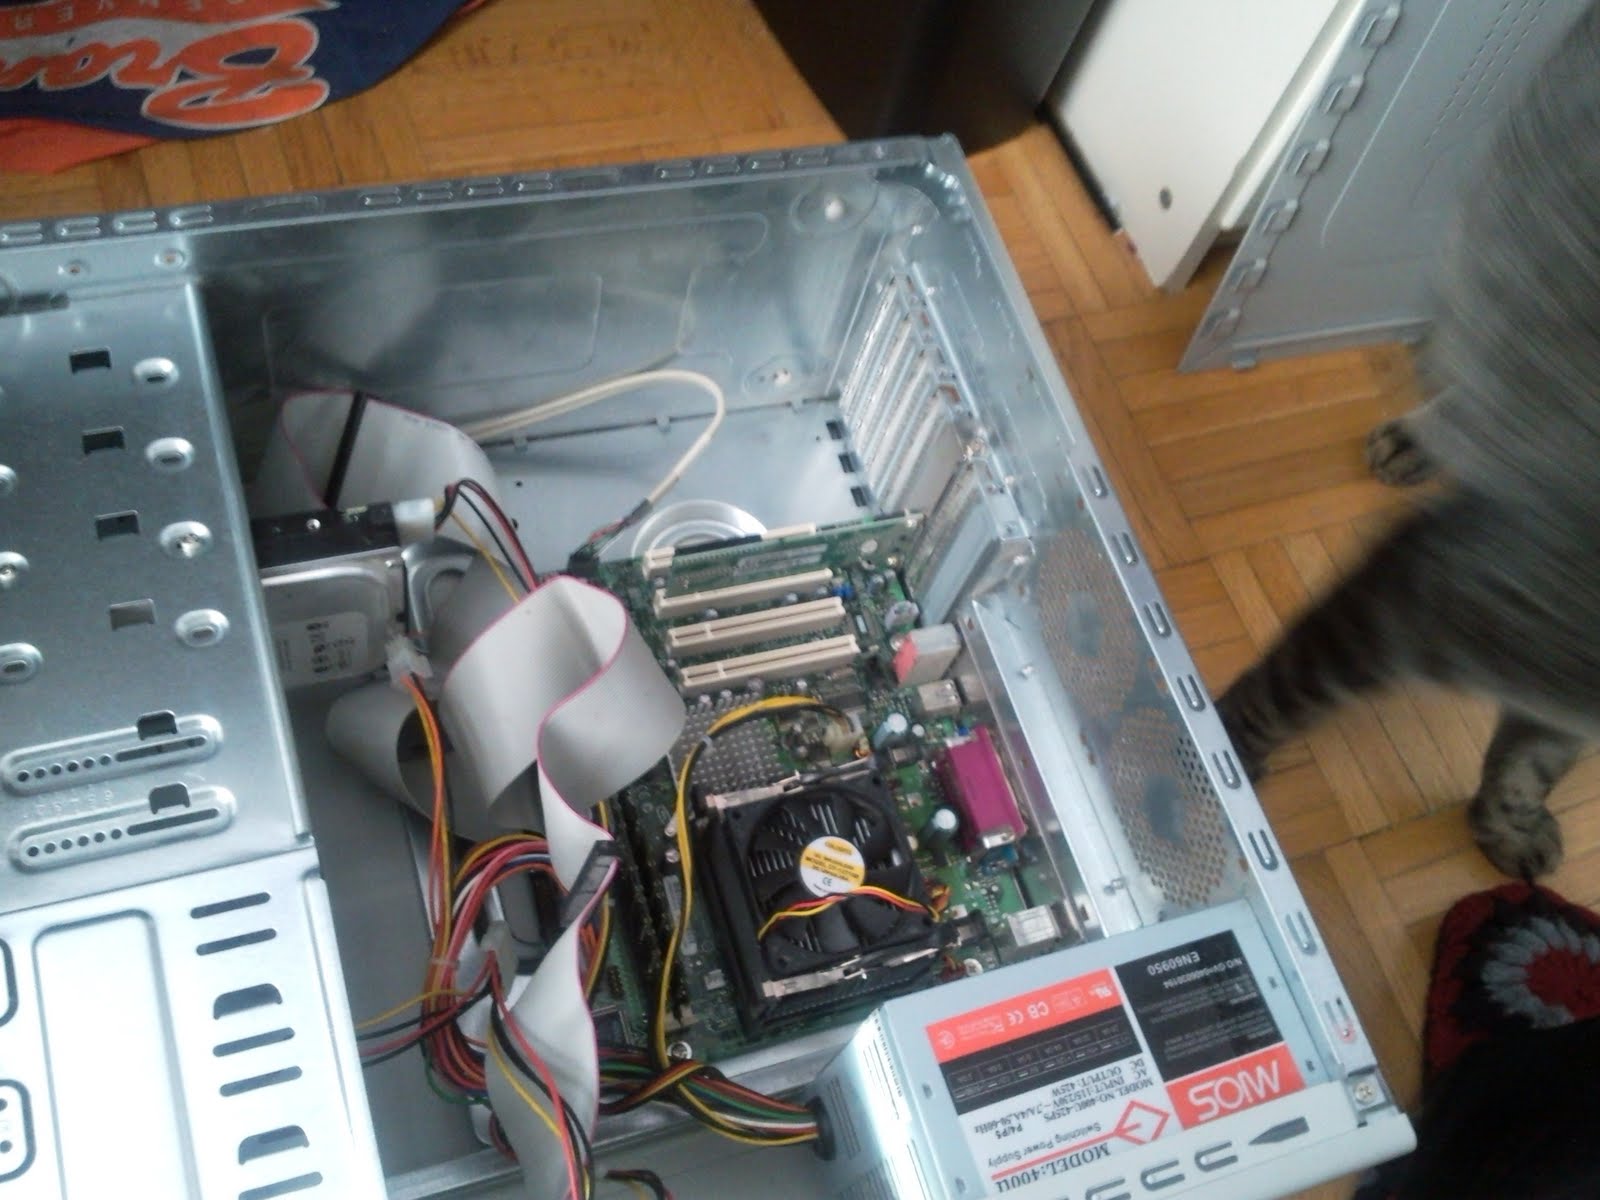 A shot of the interior. It has a pretty tiny motherboard